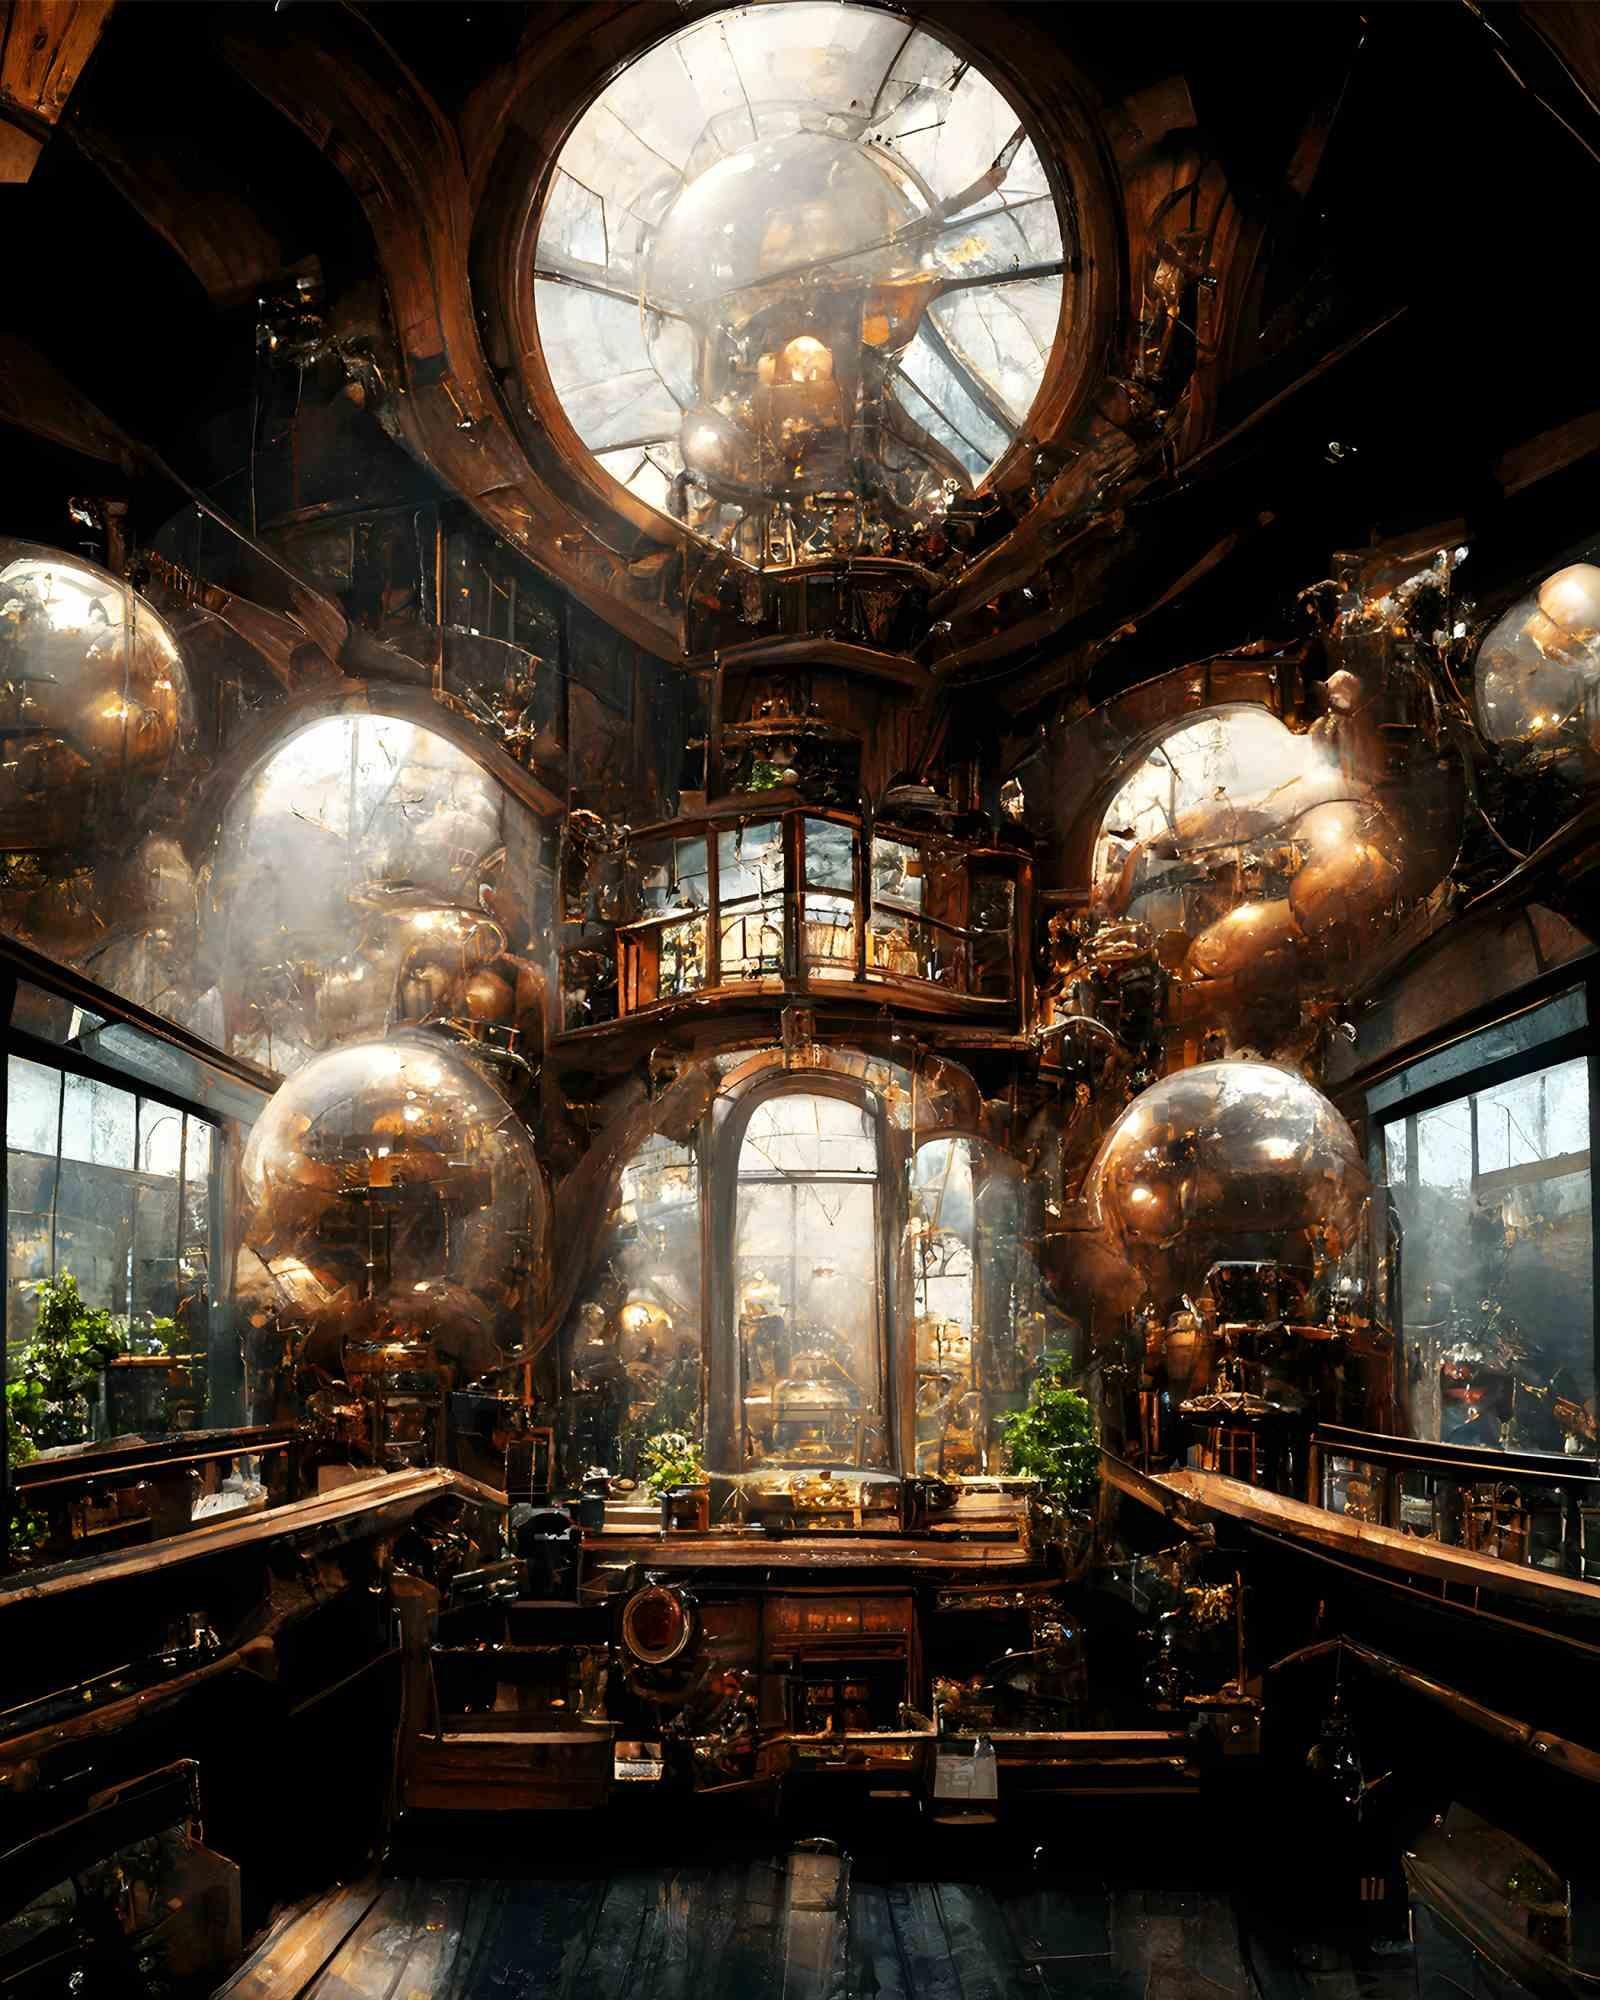 Gilded Gears is an exquisite portrayal of steampunk interior architecture, where vintage opulence intertwines seamlessly with the mechanized essence of an era gone by. The canvas reveals intricate interplays of brass and leather, where ornate